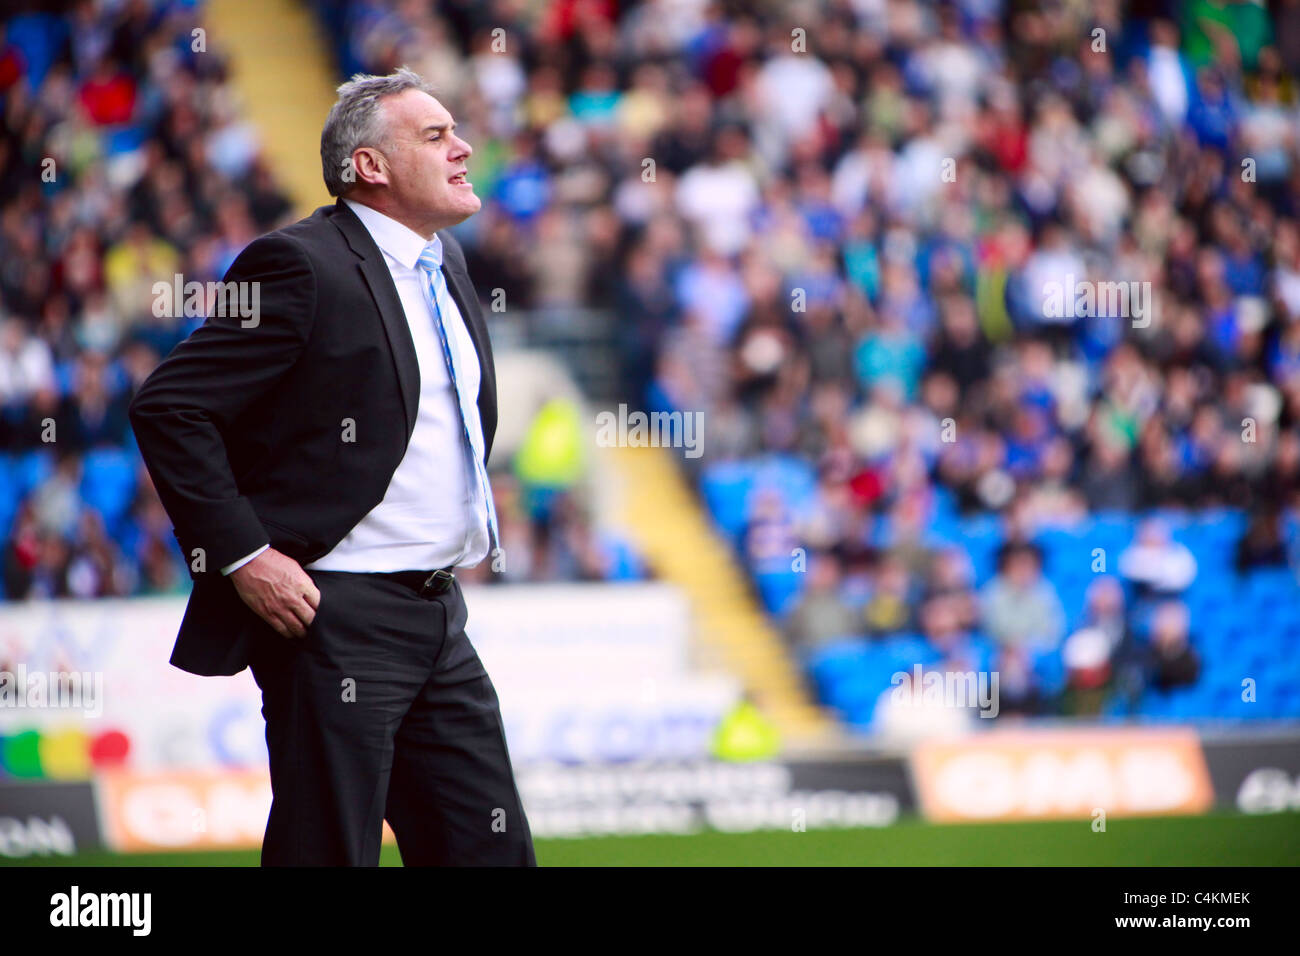 Cardiff City FC manager Dave Jones reacts by the sideline during their match against Derby County FC, April 02, 201